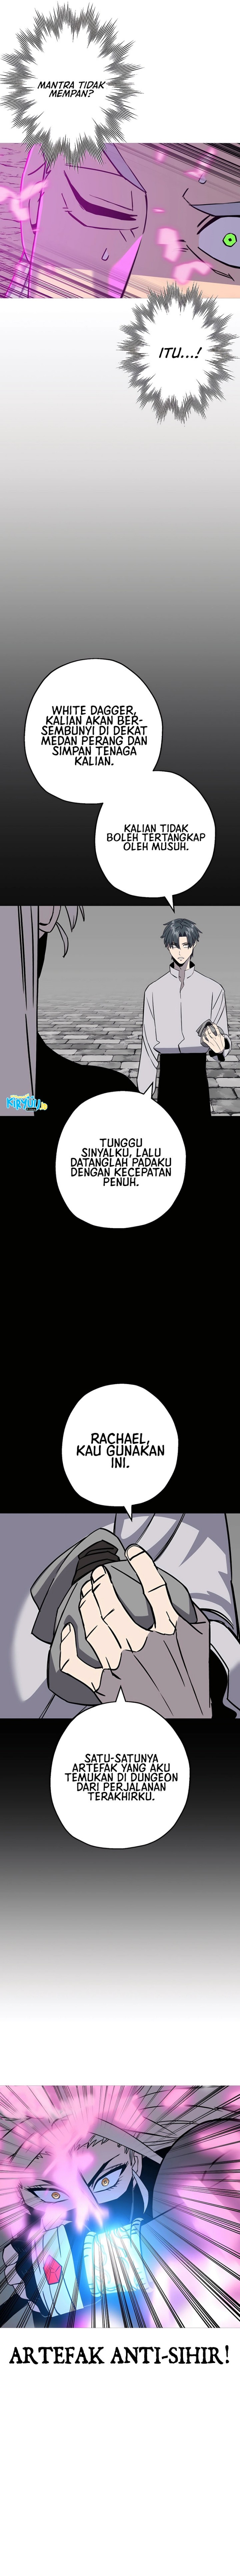 Dilarang COPAS - situs resmi www.mangacanblog.com - Komik the story of a low rank soldier becoming a monarch 136 - chapter 136 137 Indonesia the story of a low rank soldier becoming a monarch 136 - chapter 136 Terbaru 12|Baca Manga Komik Indonesia|Mangacan